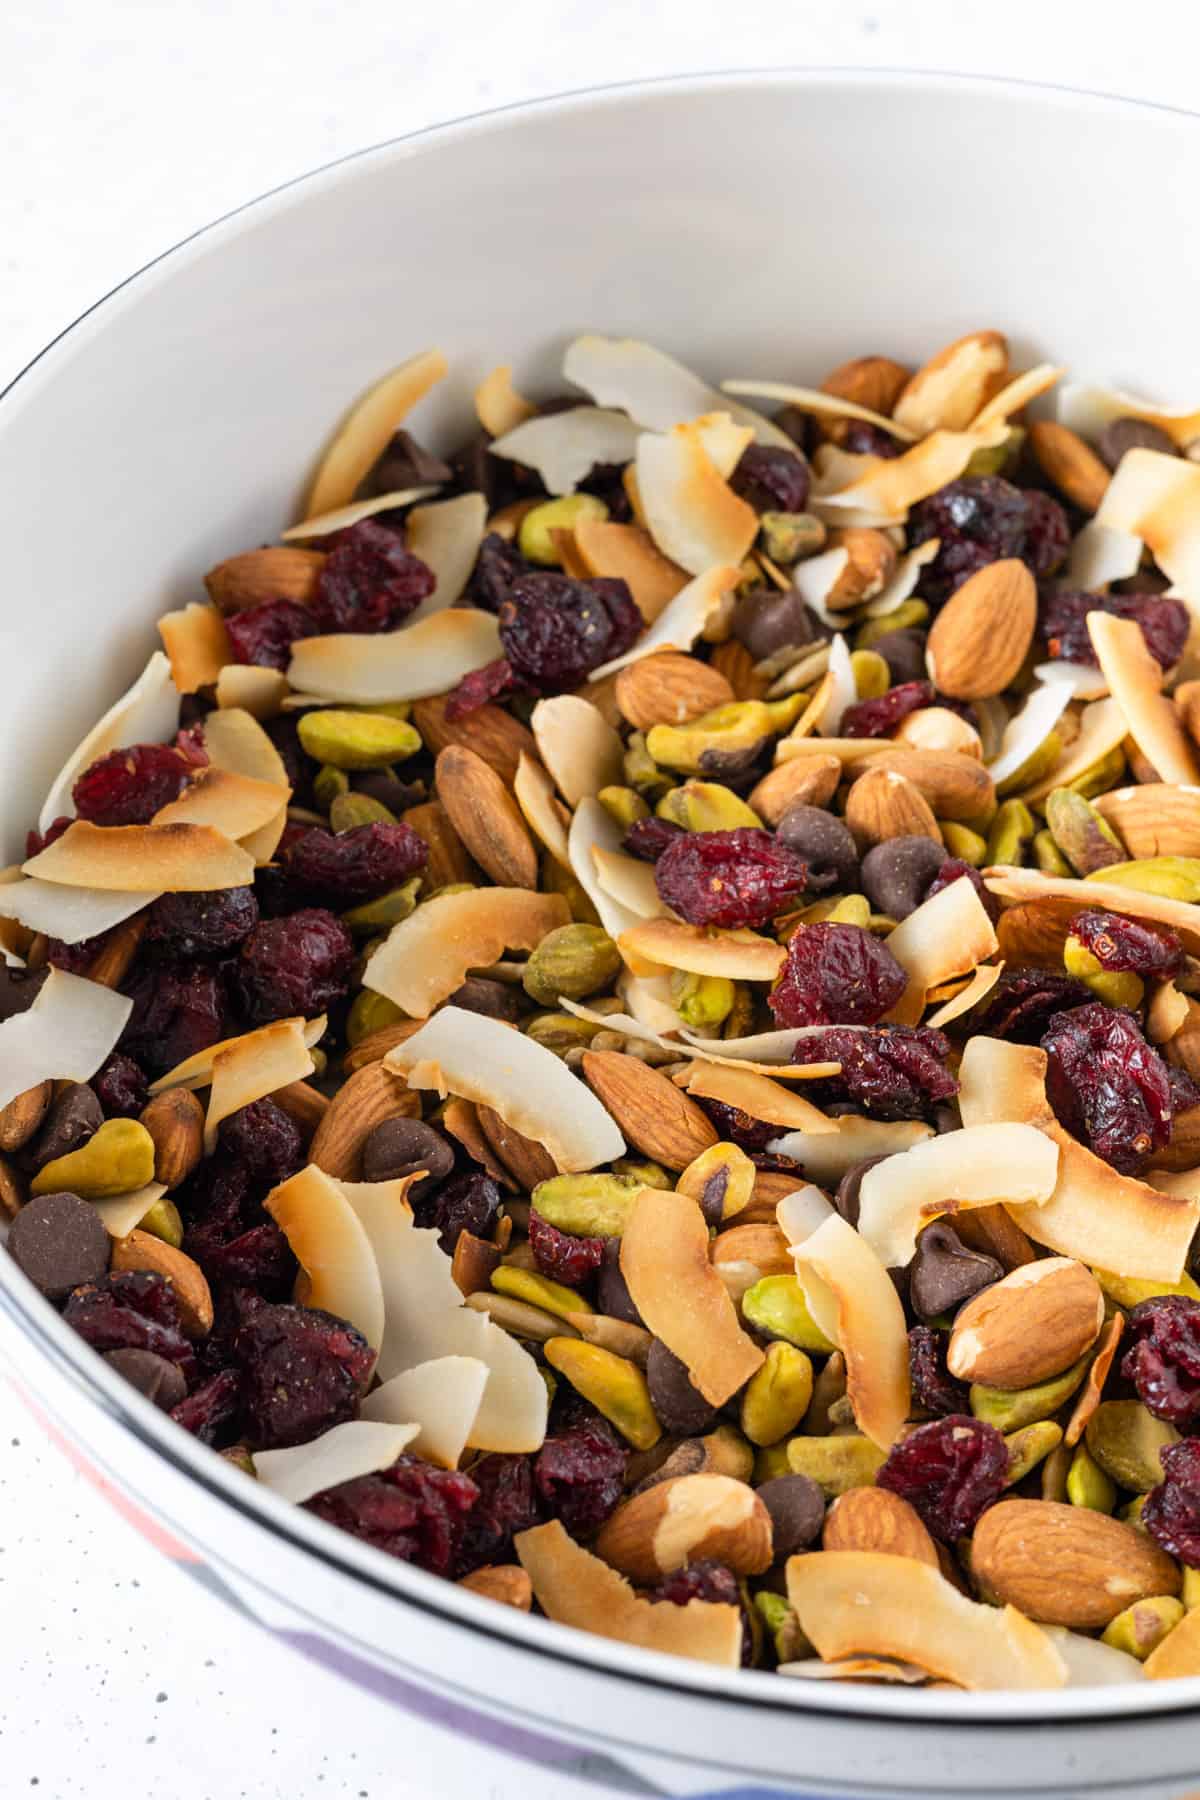 A large bowl of trail mix.